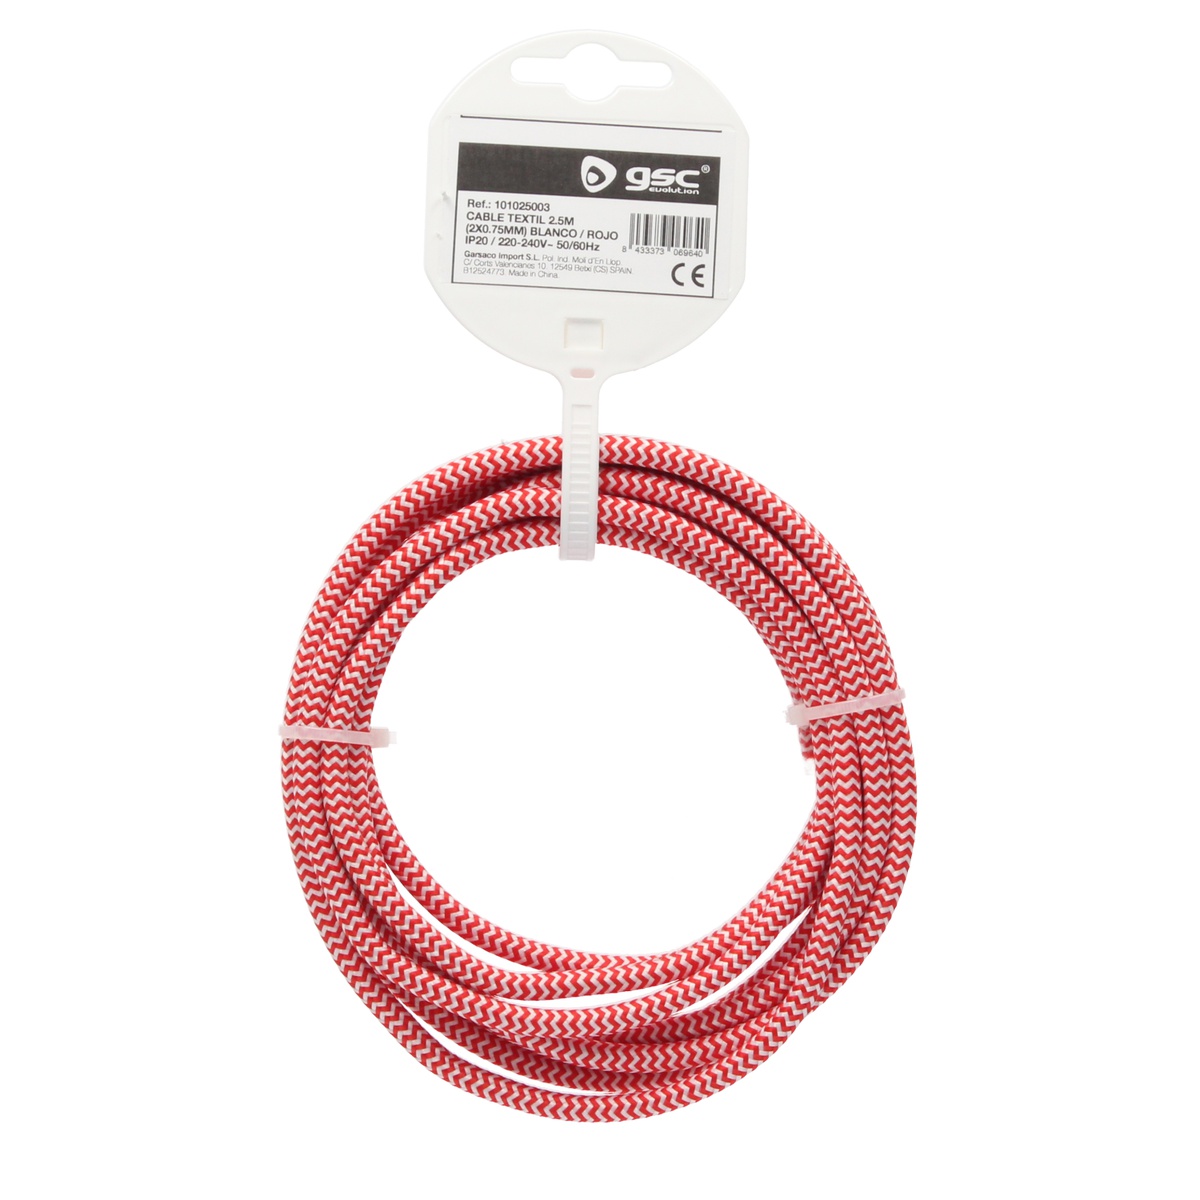 2.5m textile cable (2x0.75mm) White/red